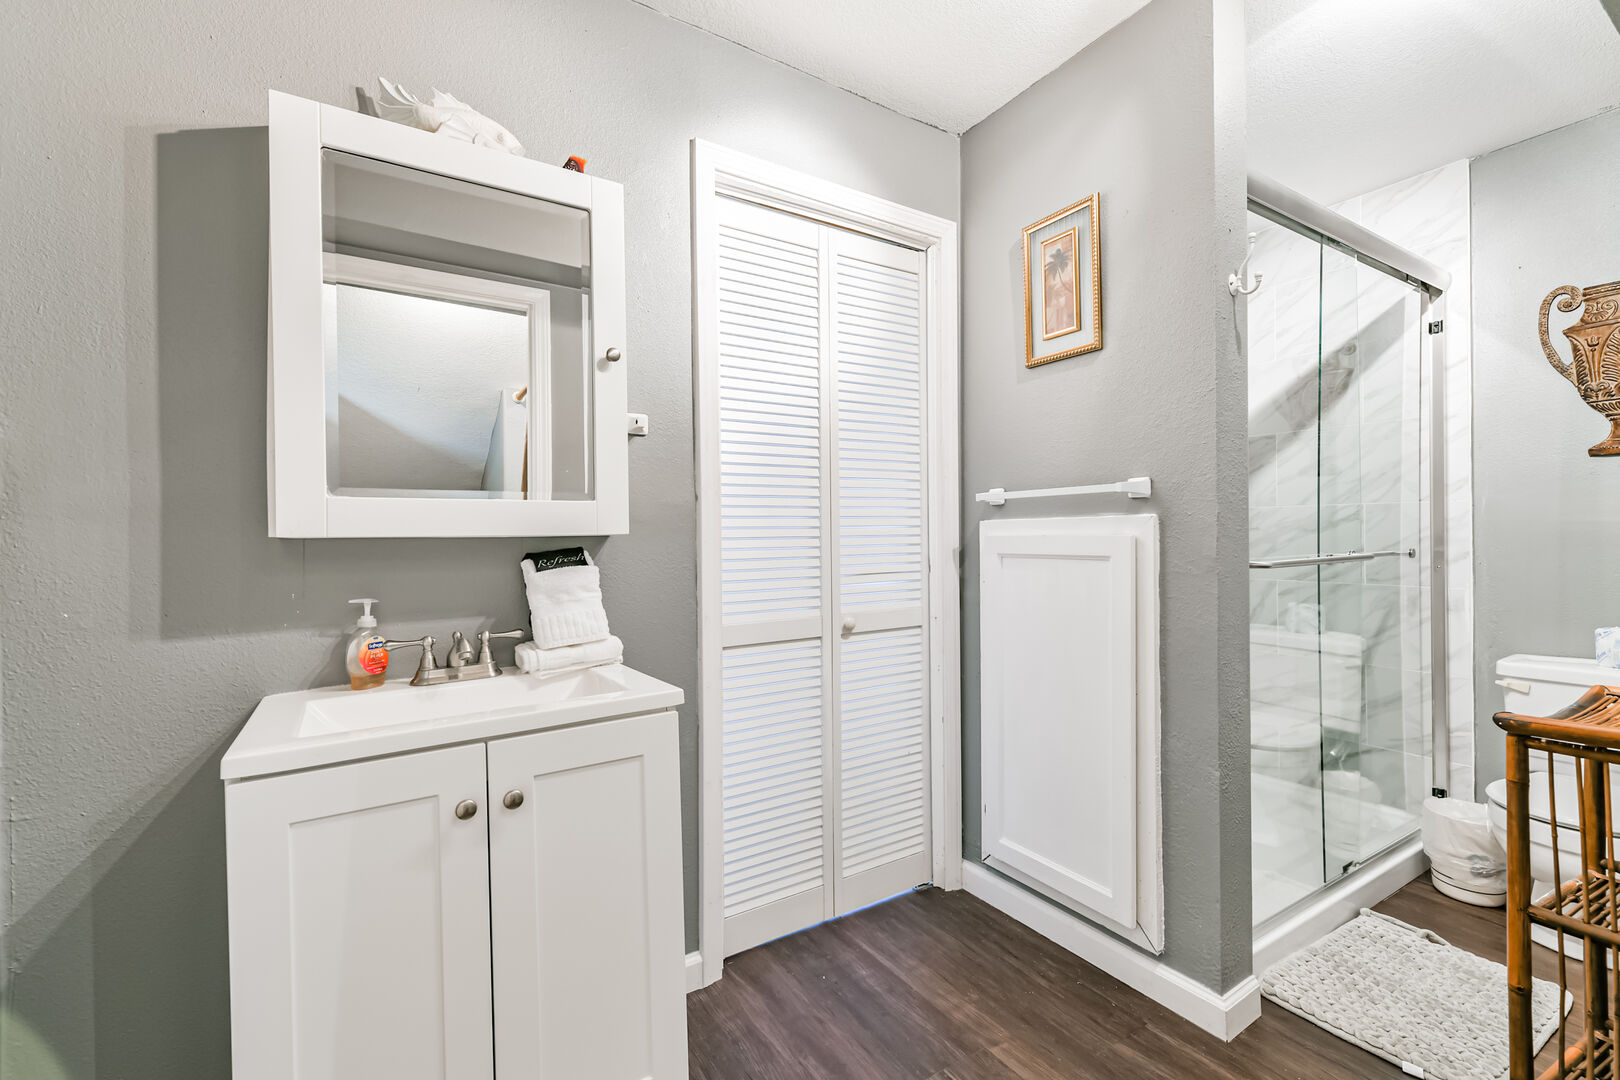 Nicely remodeled downstairs bath with walk-in shower.